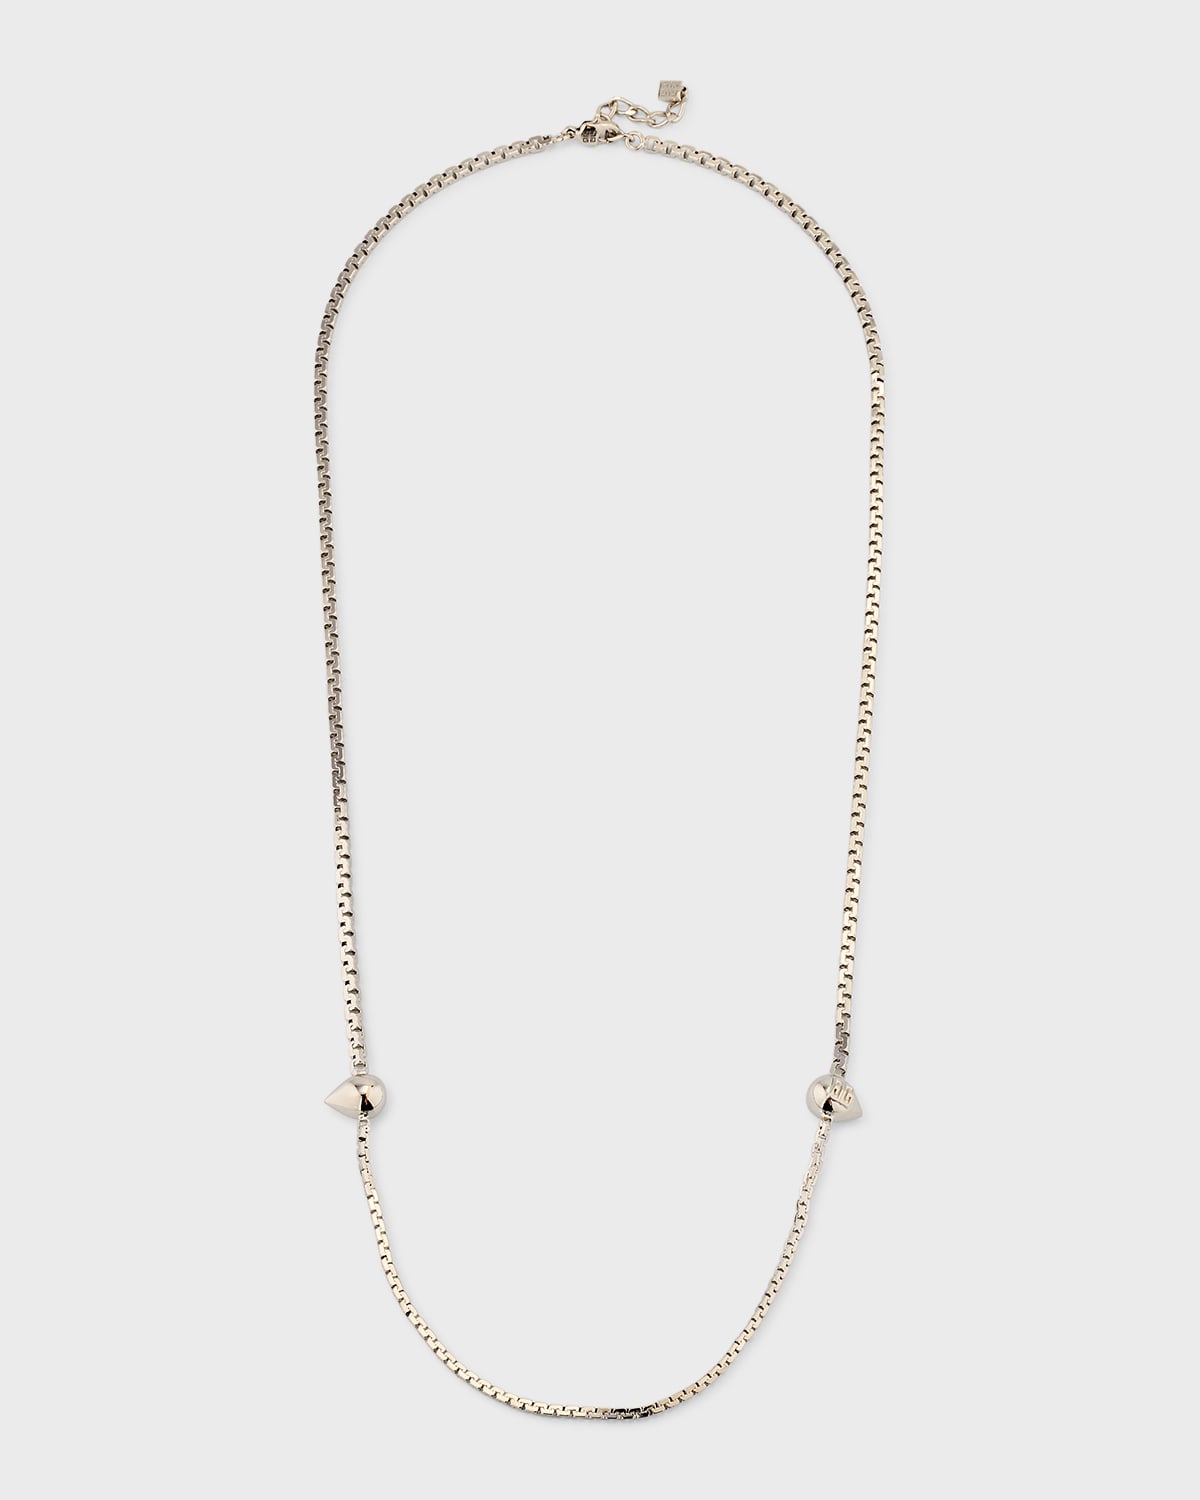 GIVENCHY MEN'S G-STUD LONG CHAIN NECKLACE